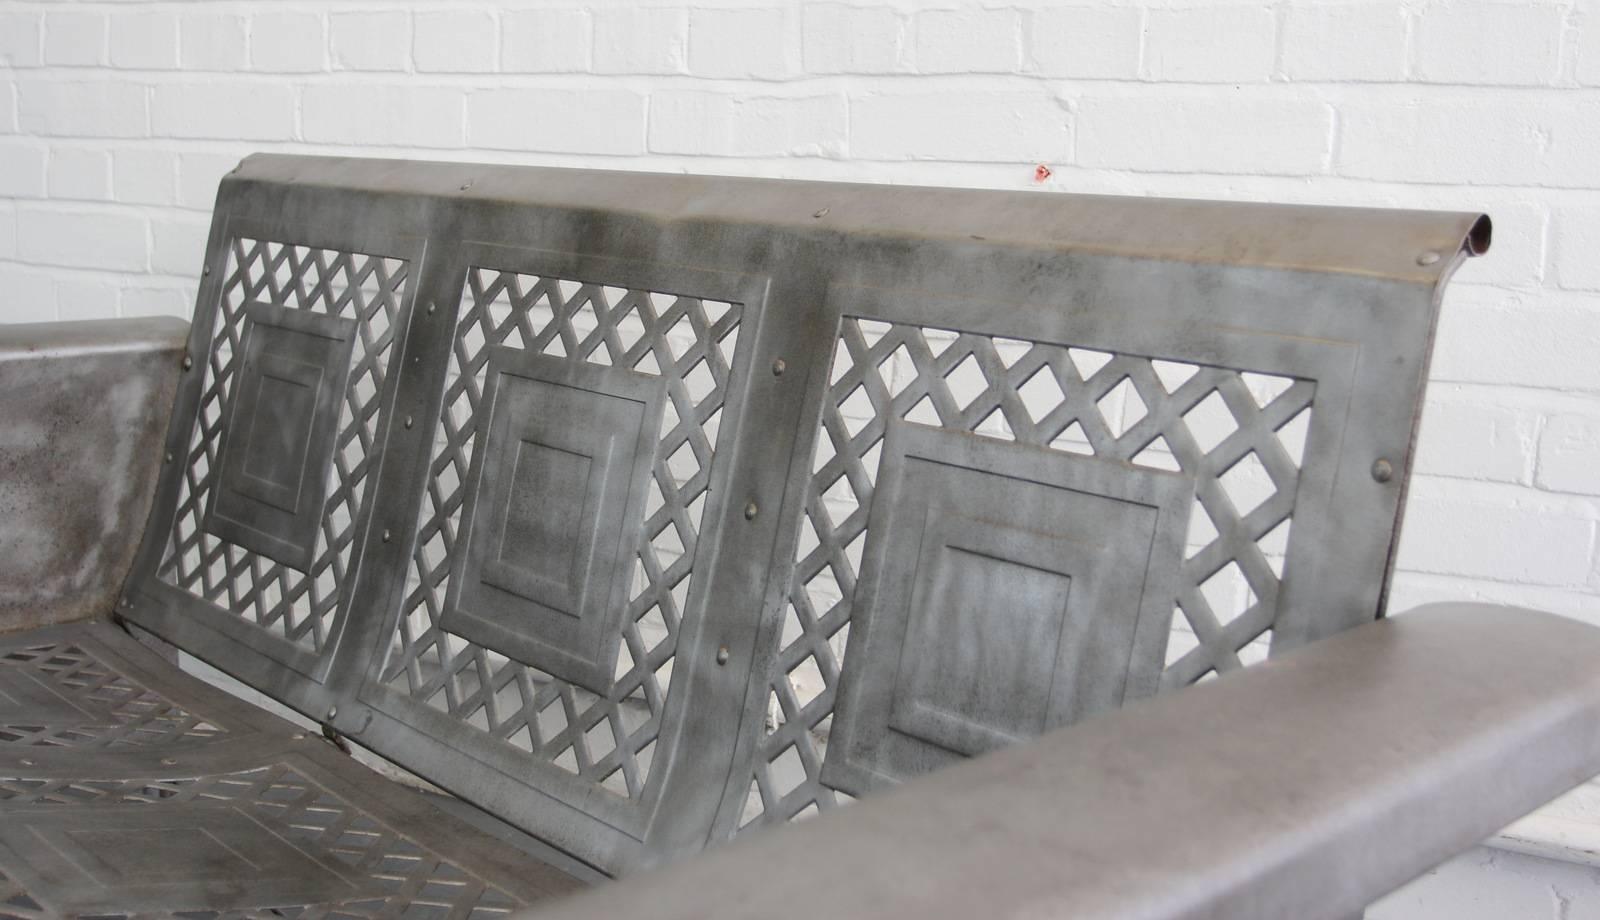 American Steel Porch Bench by The Bunting Glider Co., circa 1930s